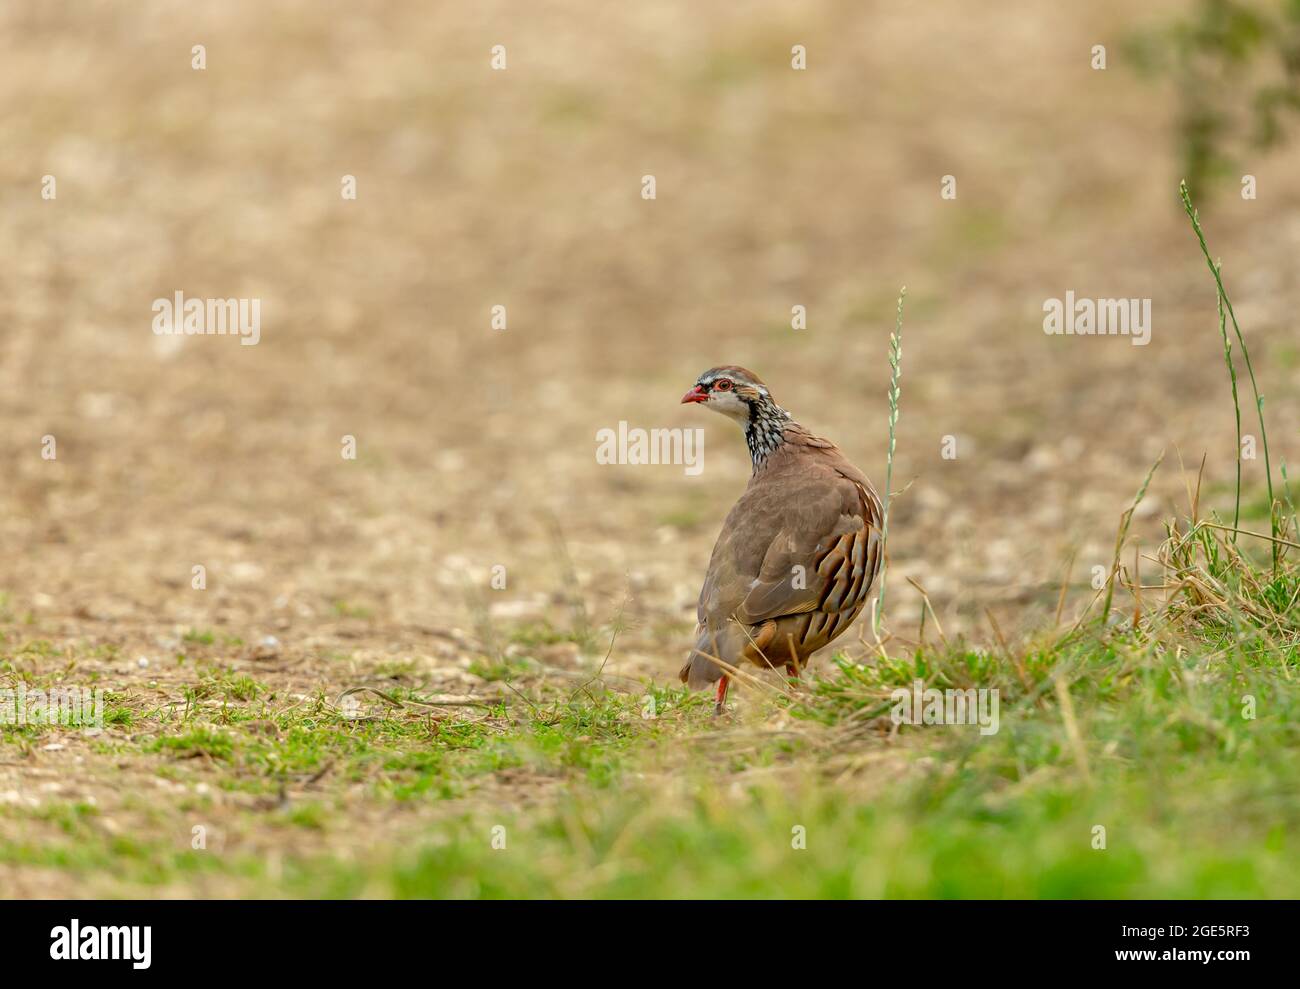 Red-legged or French partridge on natural farmland habitat, facing left.  Blurred background.  Space for copy.  Horizontal.  Scientific name:  Alector Stock Photo